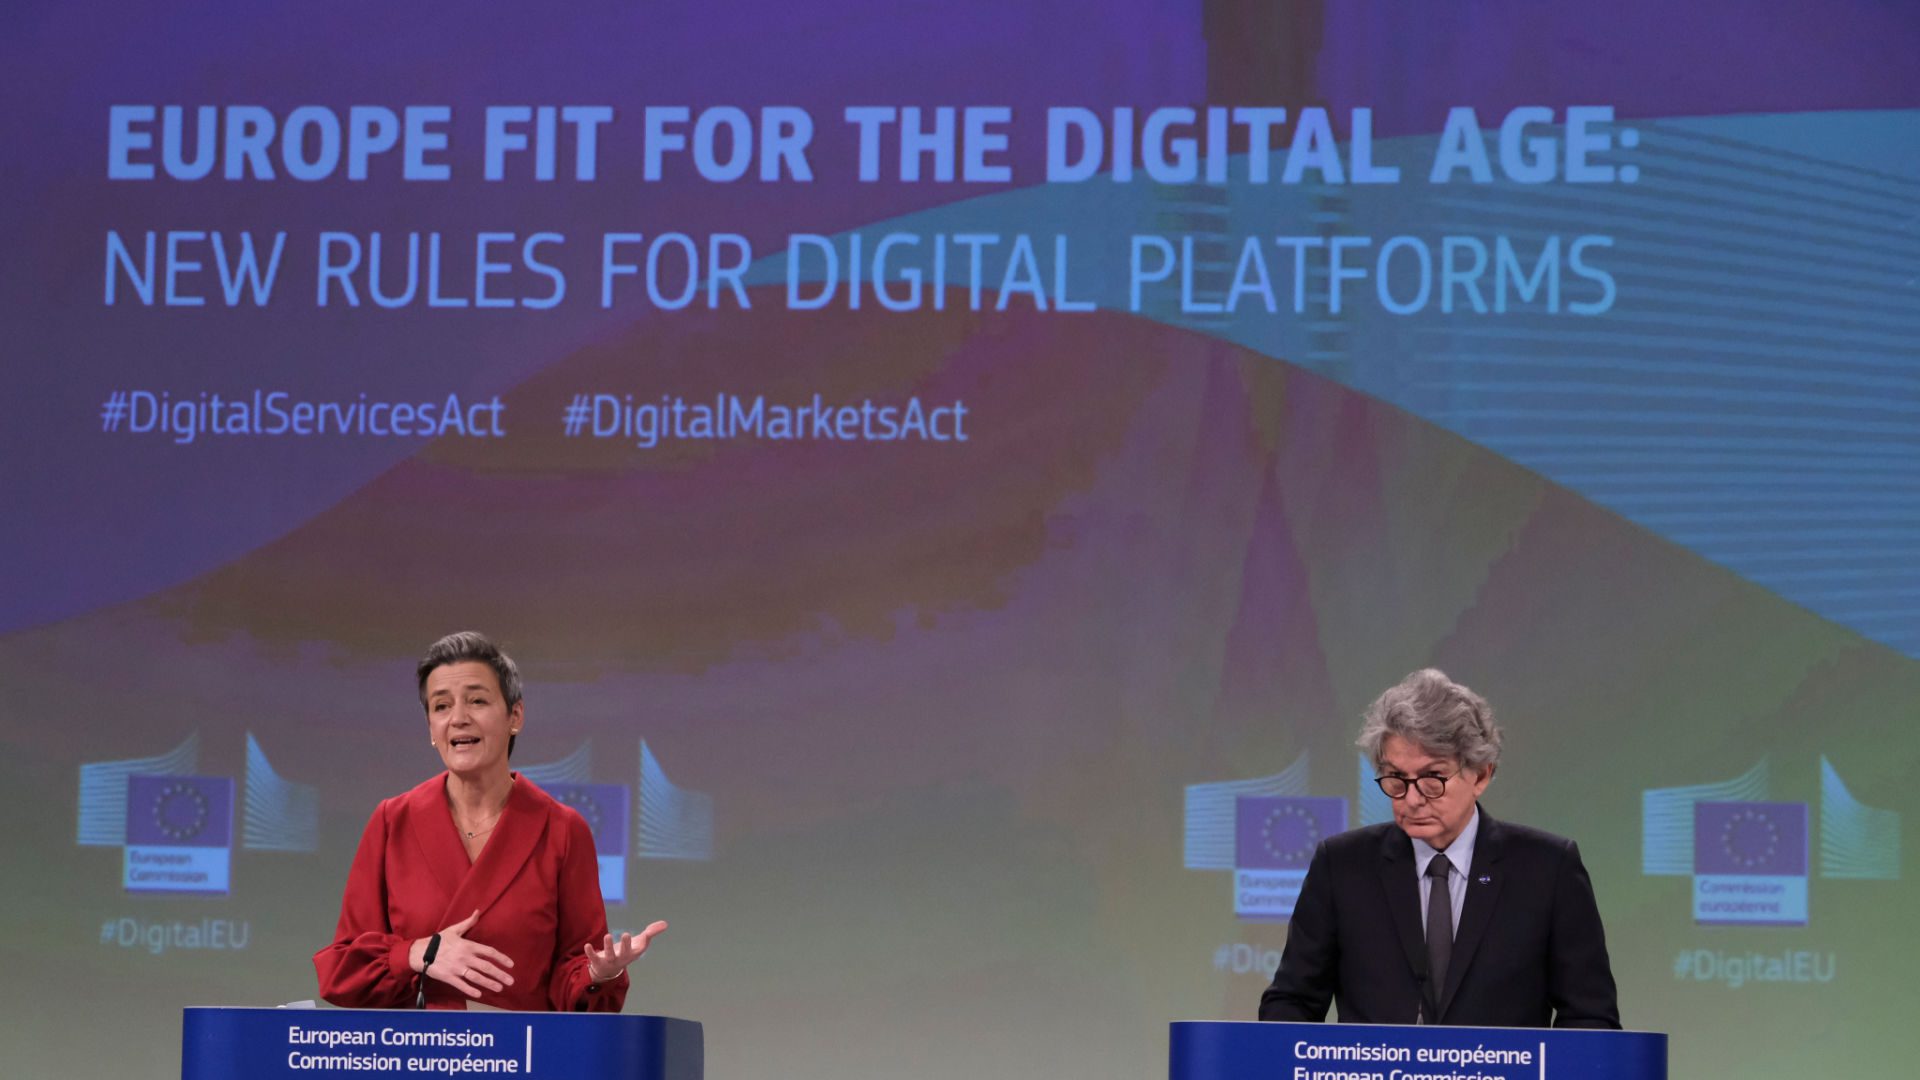 Press conference by Executive Vice-President Margrethe VESTAGER and Commissioner Thierry BRETON on stage discussing the Digital Services Act and the Digital Markets Act